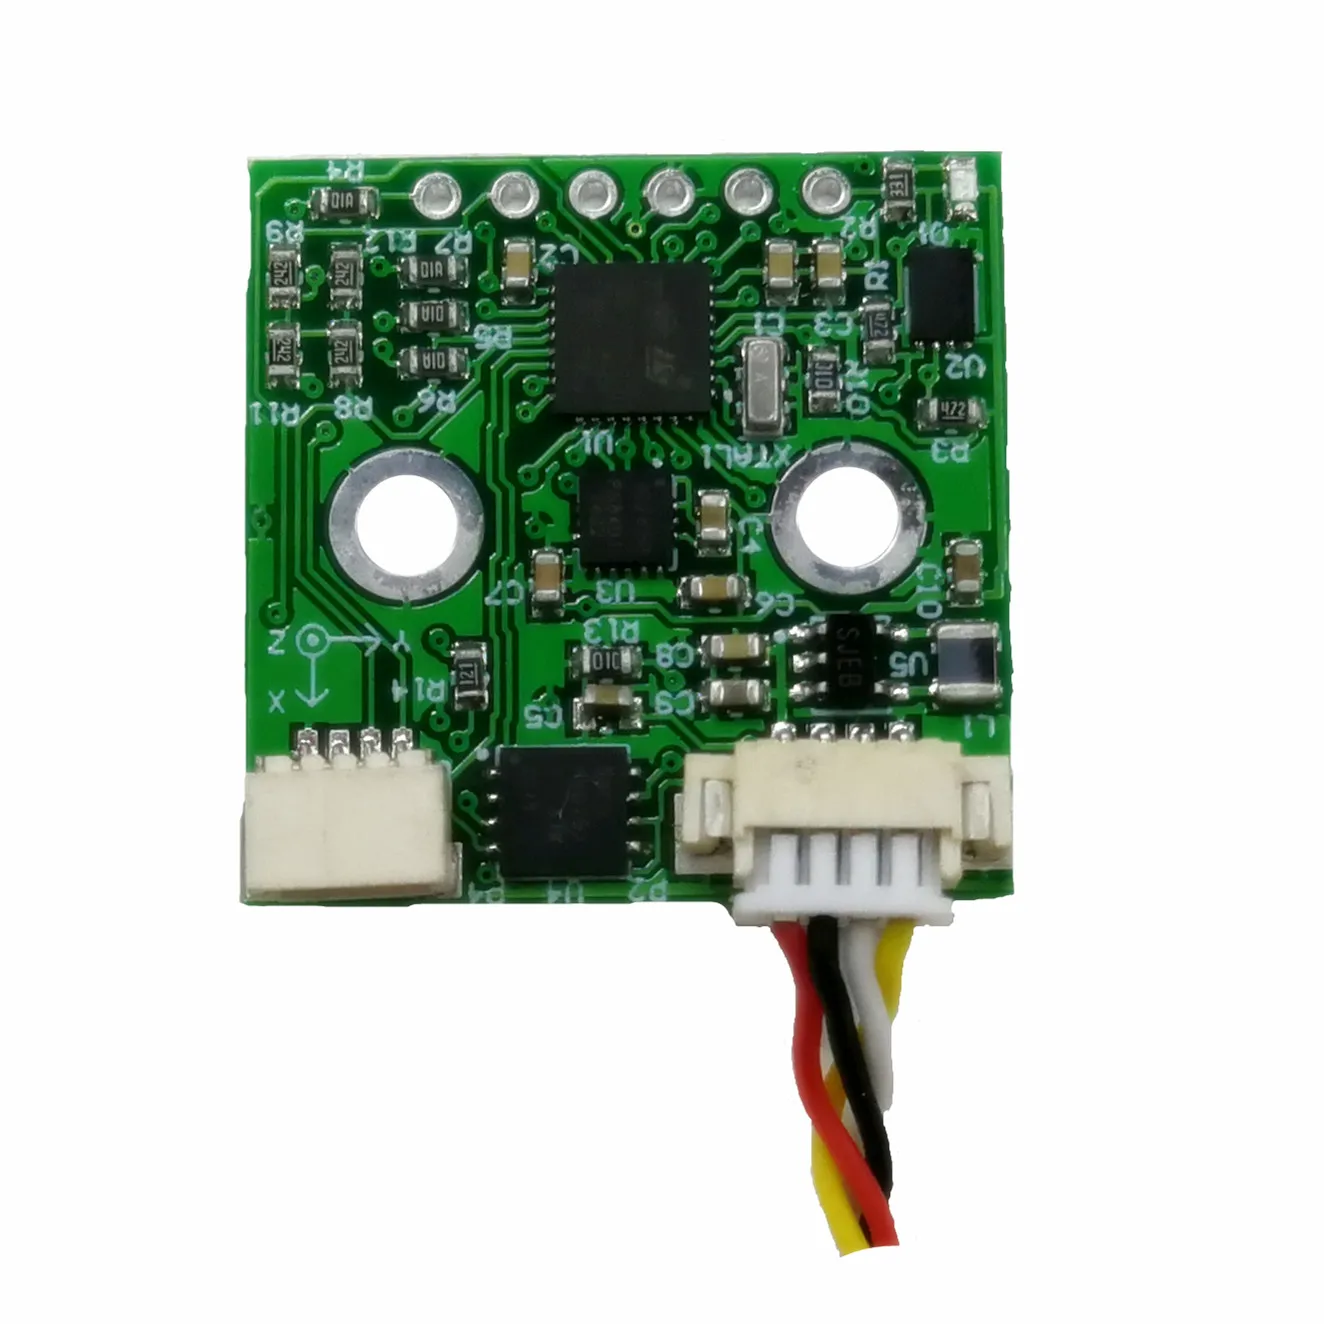 CANBUS IMU Russian BASECAM PRO drives high current board CAN bus sensor for large PTZ